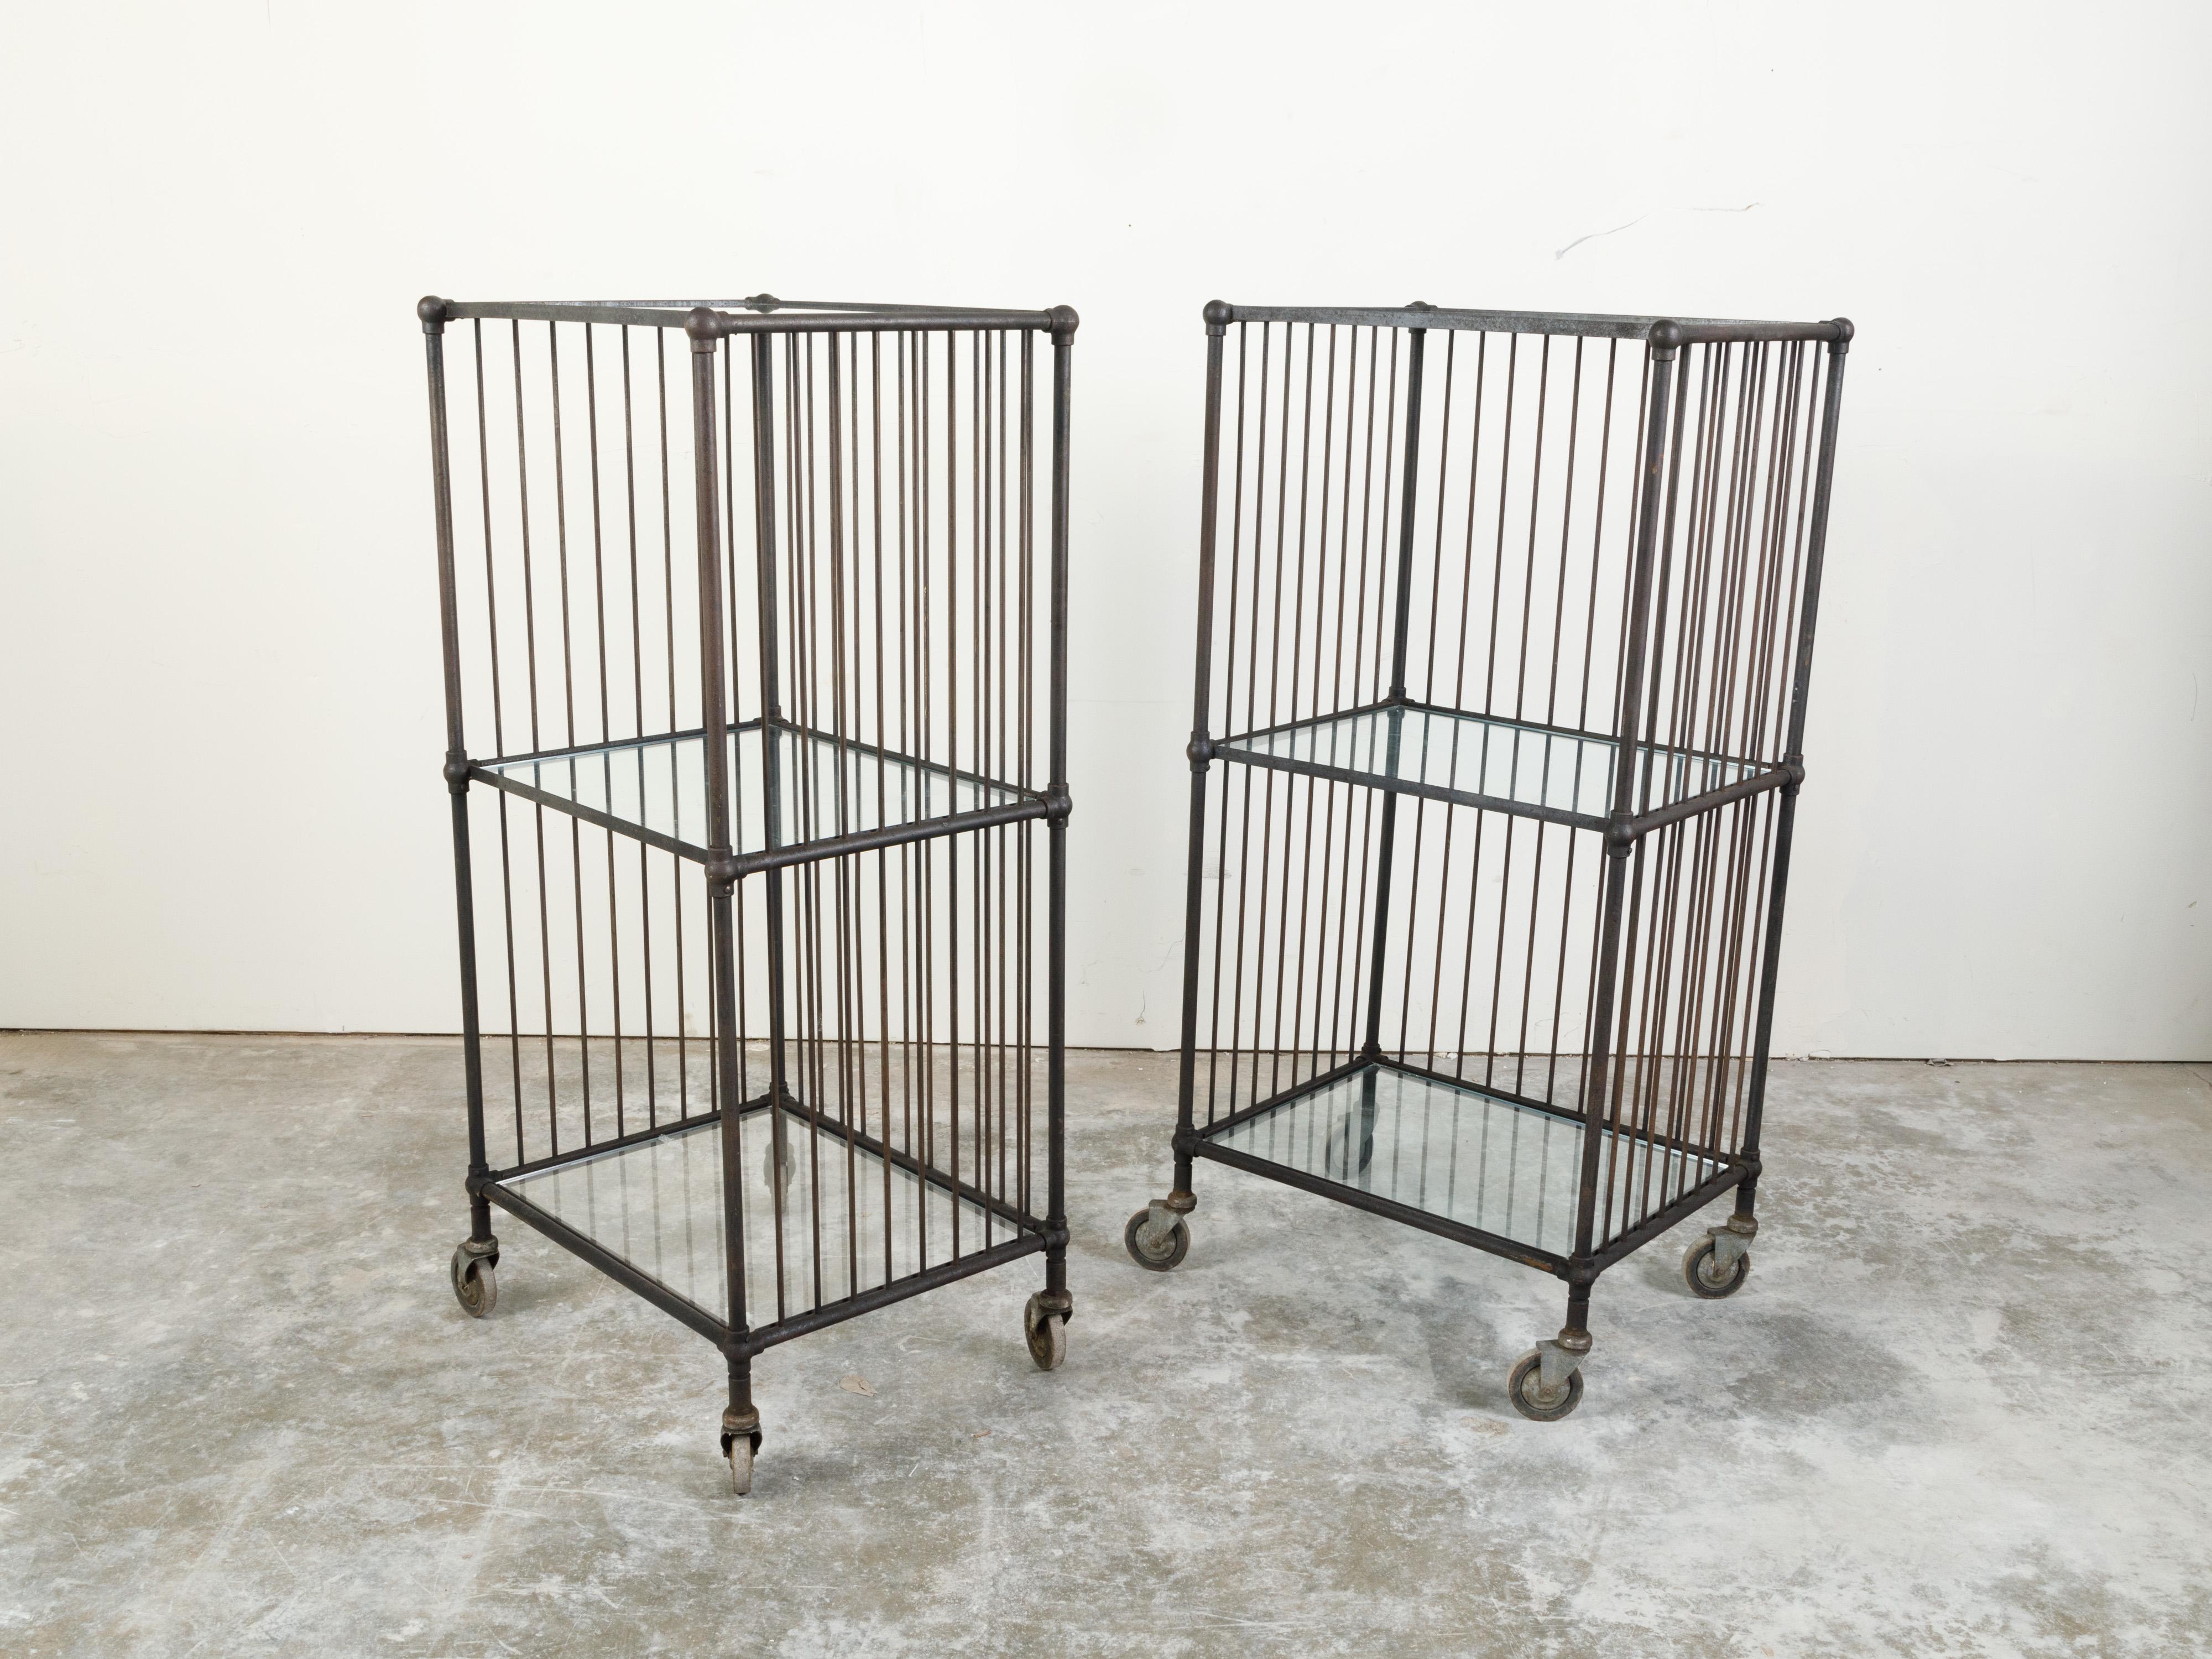 Vintage Industrial Carts with Glass Shelves and Casters, Sold Individually For Sale 5